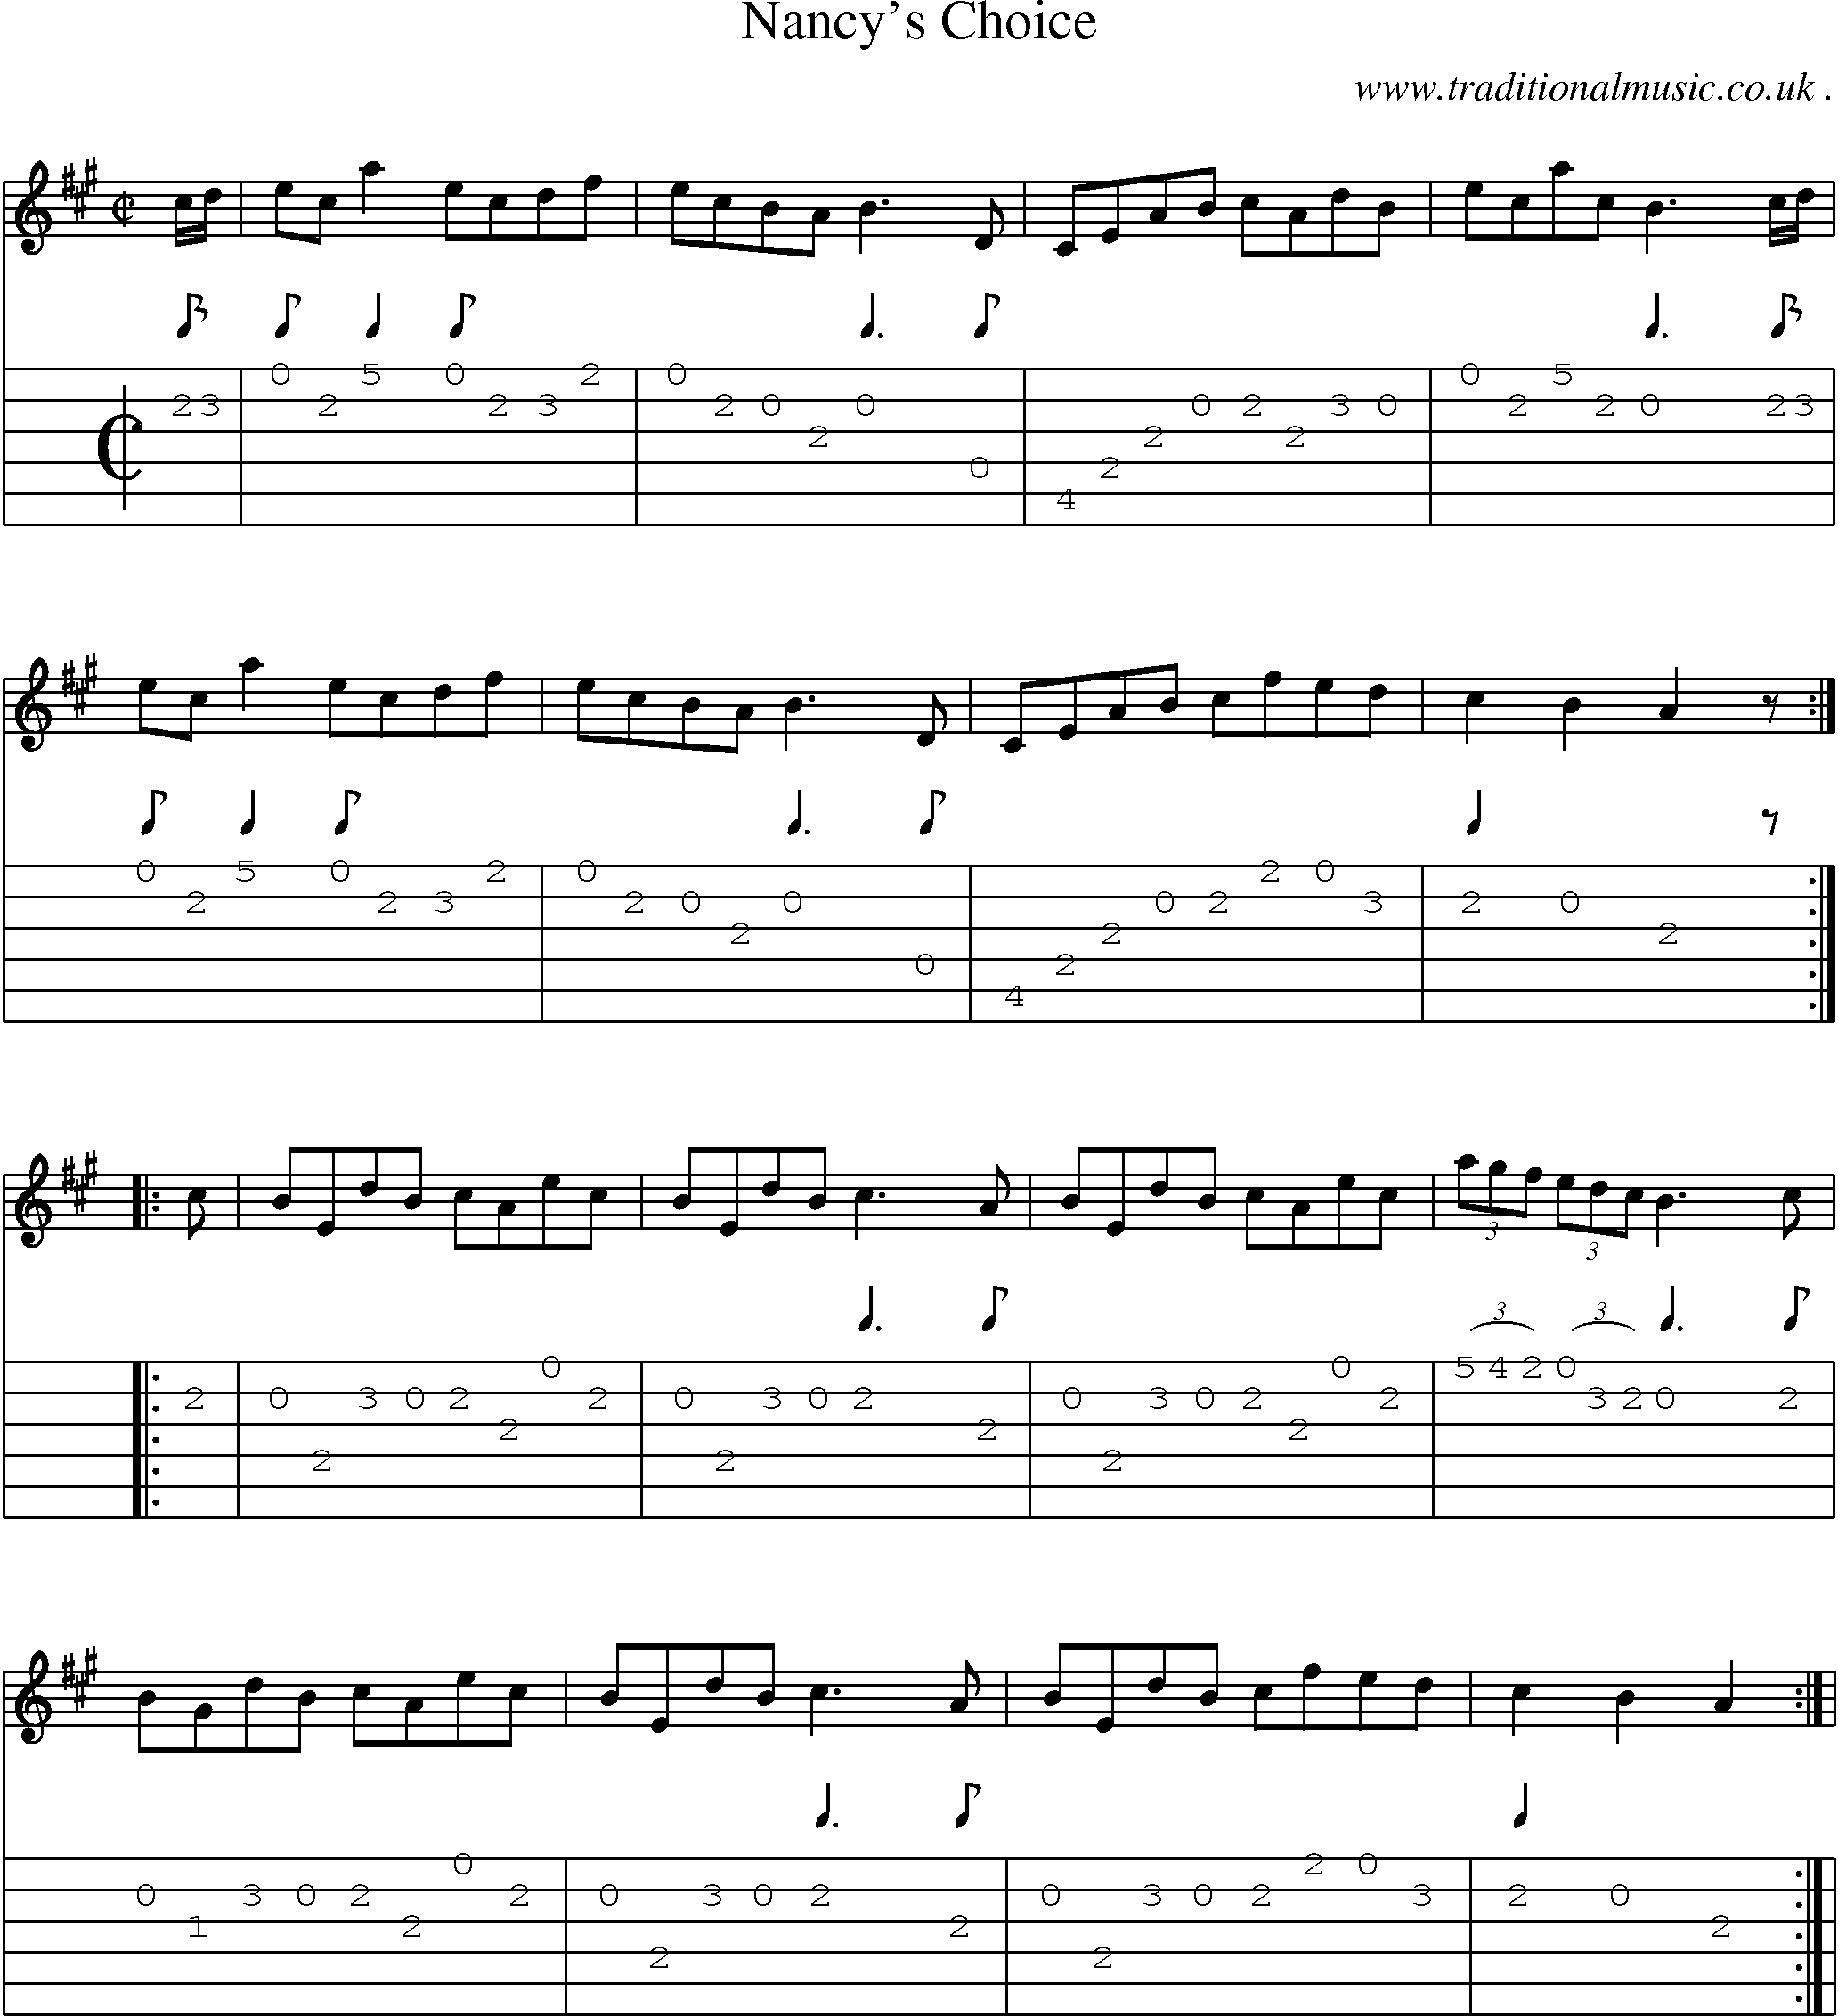 Sheet-Music and Guitar Tabs for Nancys Choice